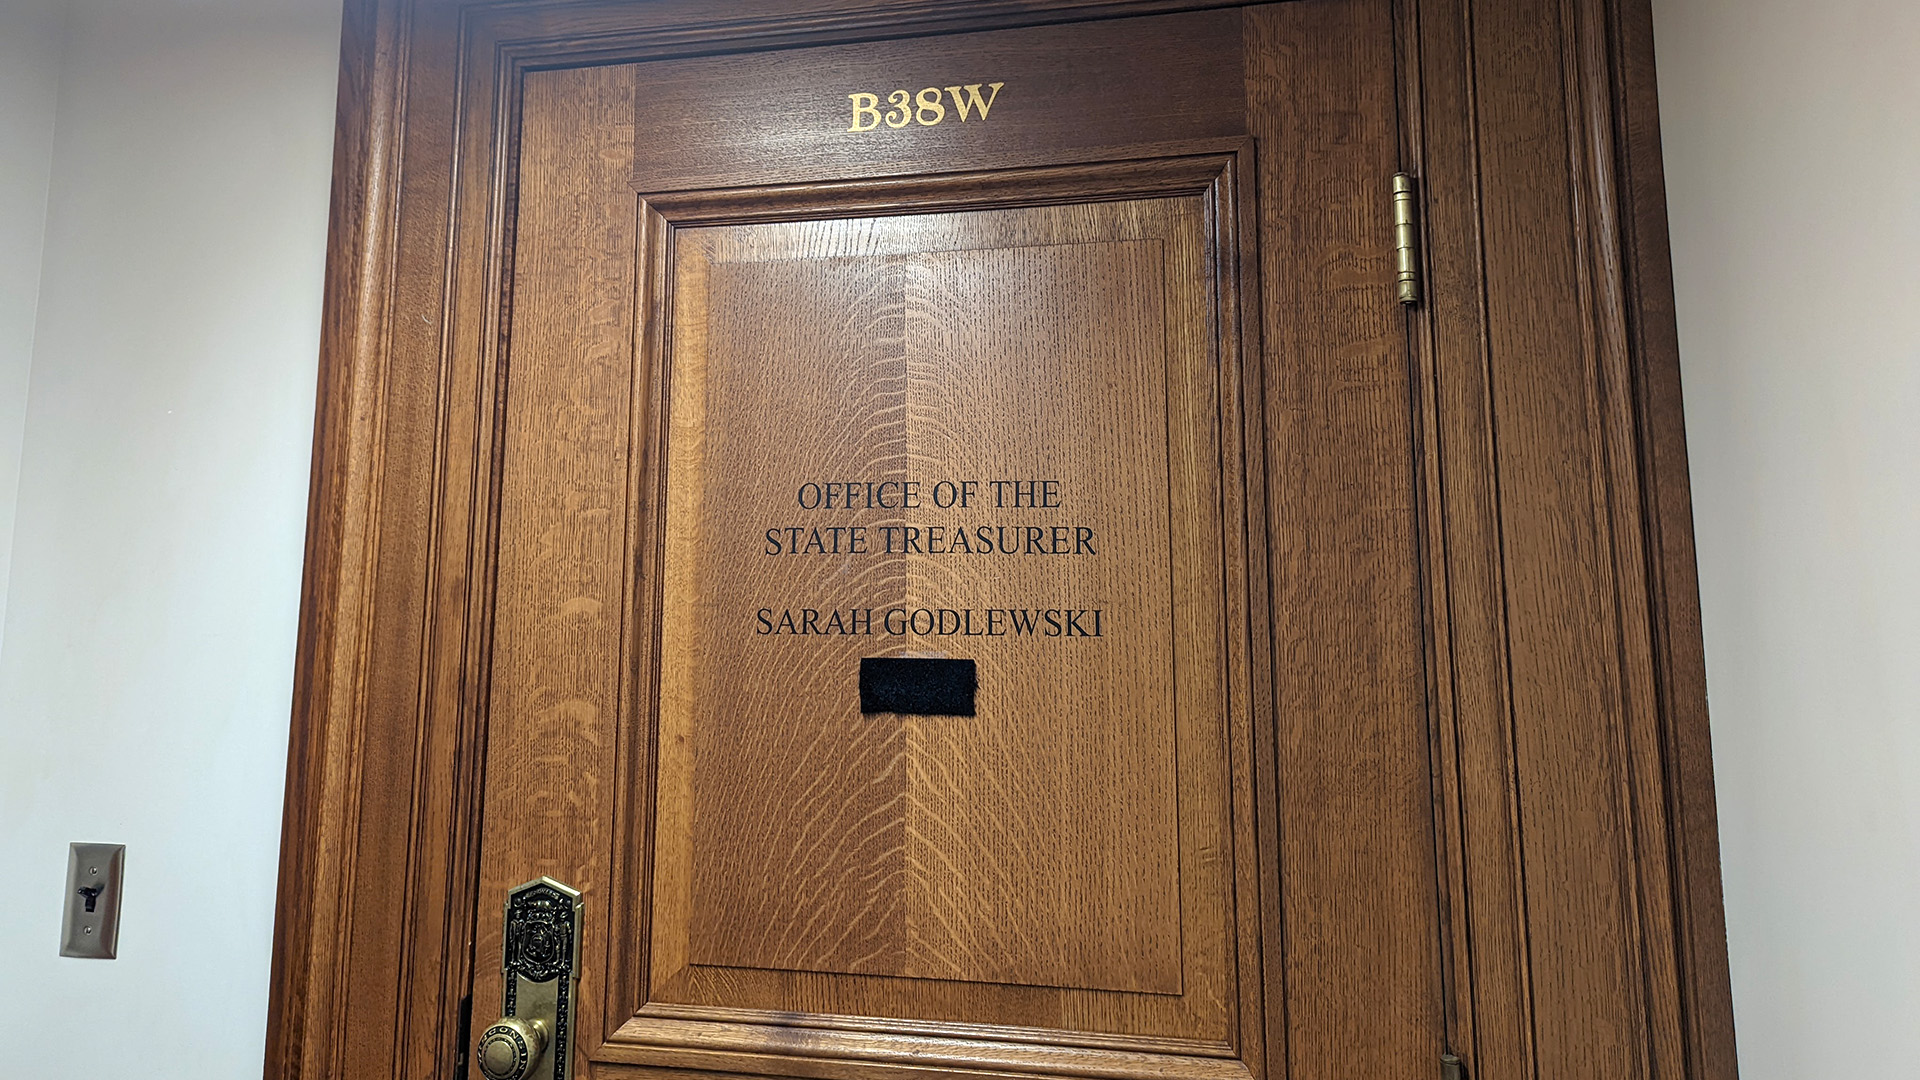 A wood-paneled door with a brass door handle and hinges has the stenciled labels "B38W" and "Office of the State Treasurer Sarah Godlewski" with a velcro patch for attaching items to its surface.